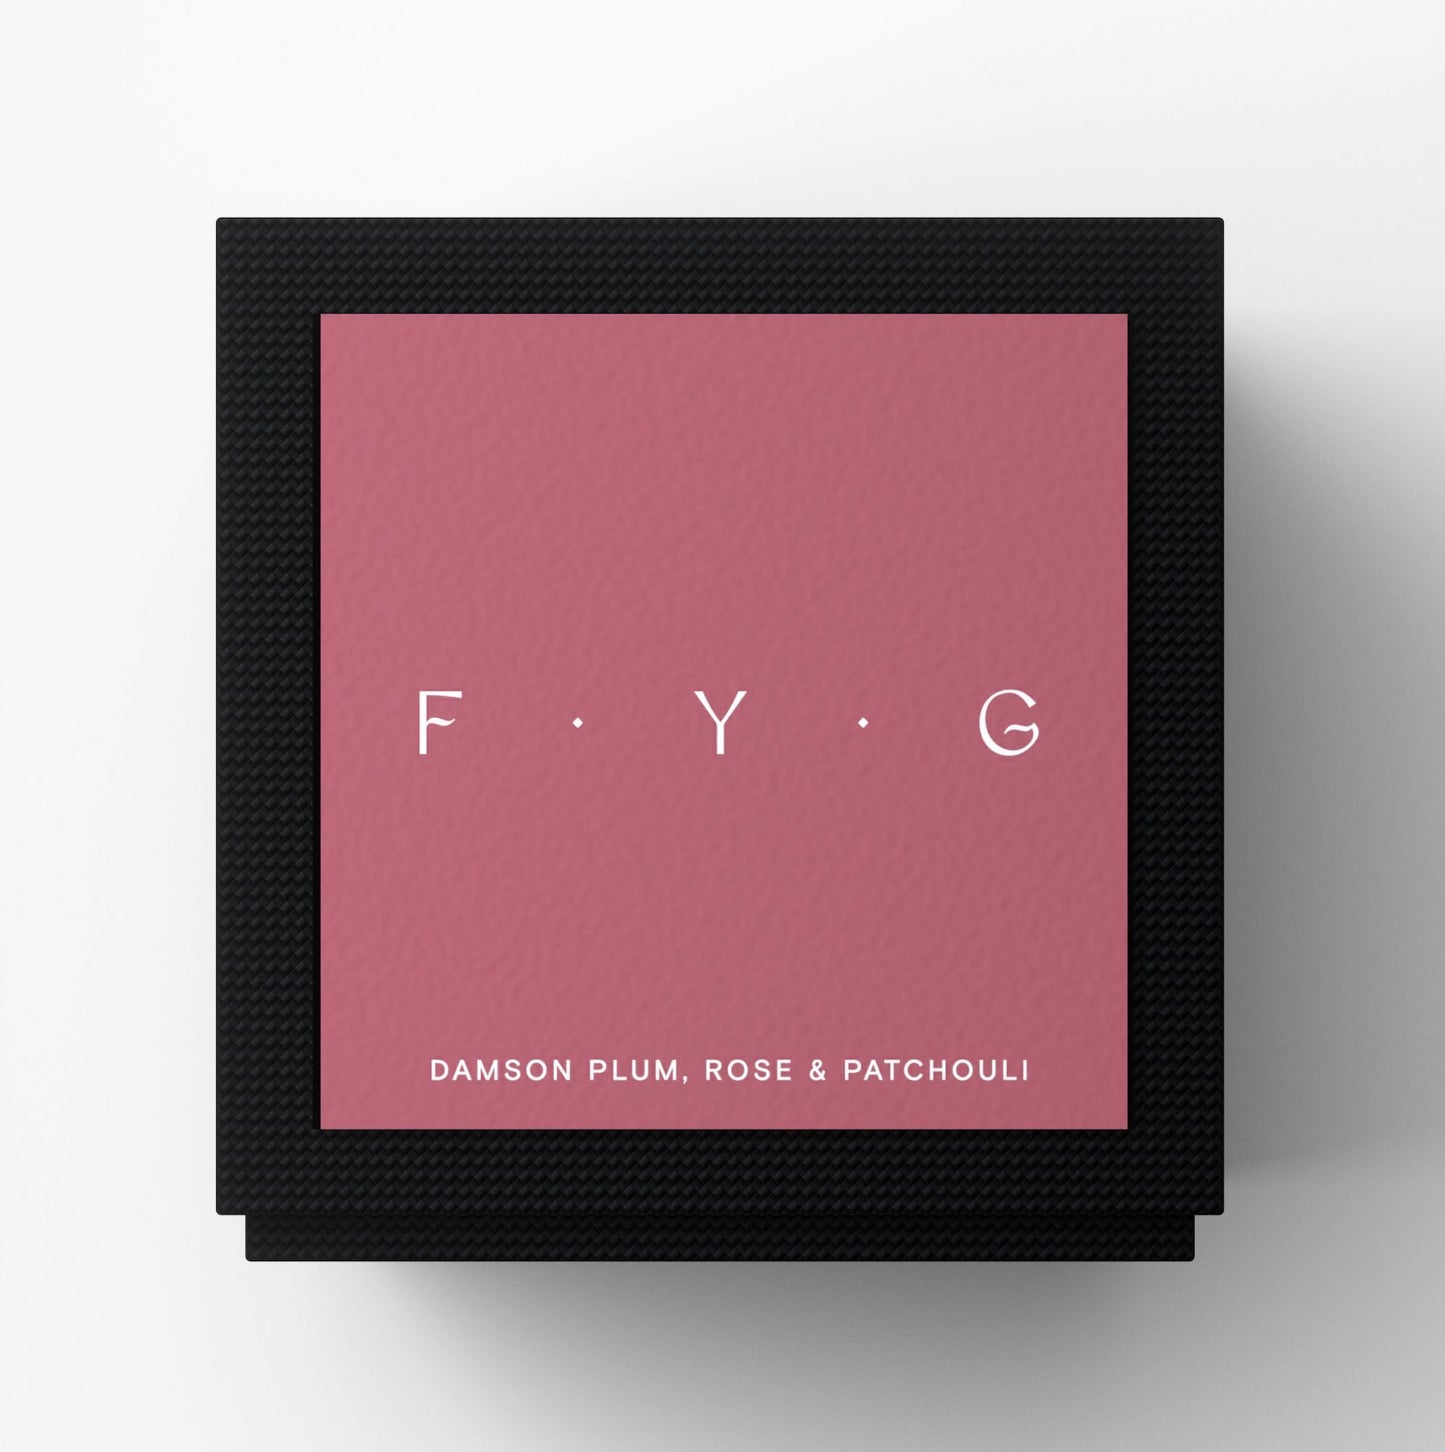 FYG Damson, Rose & Patchouli Candle in box